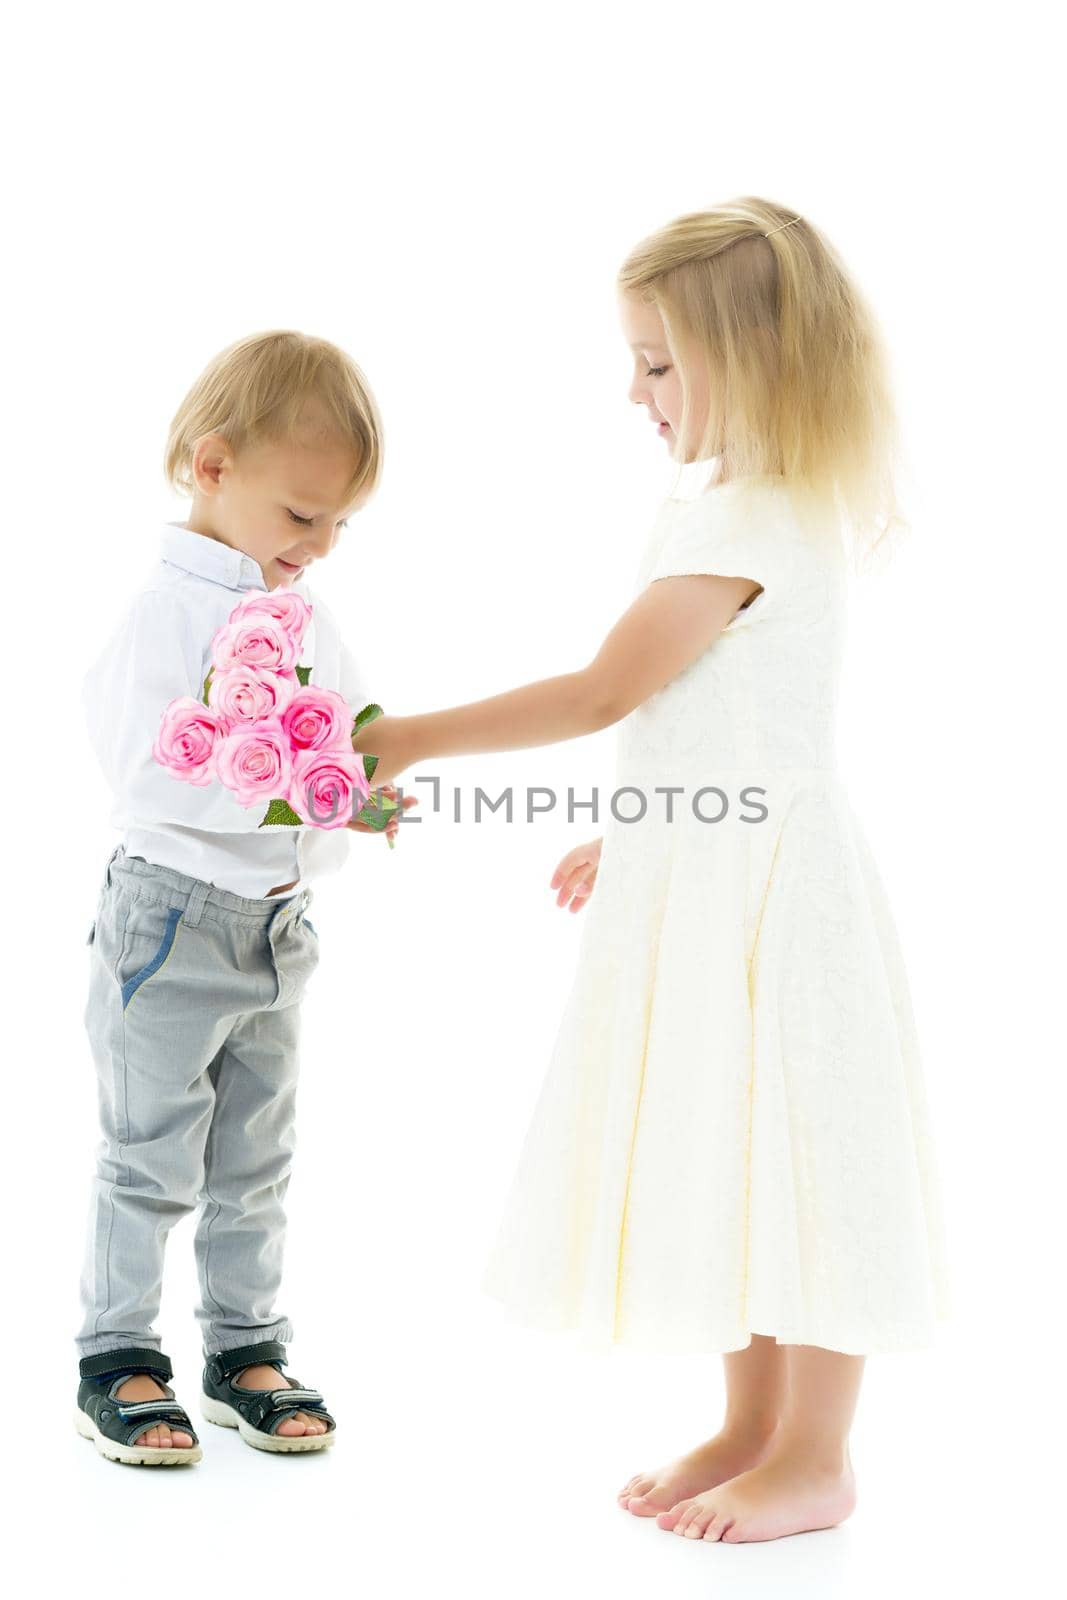 A little boy gives a girl a bouquet of flowers for his birthday. The concept of love, family values. Isolated on white background